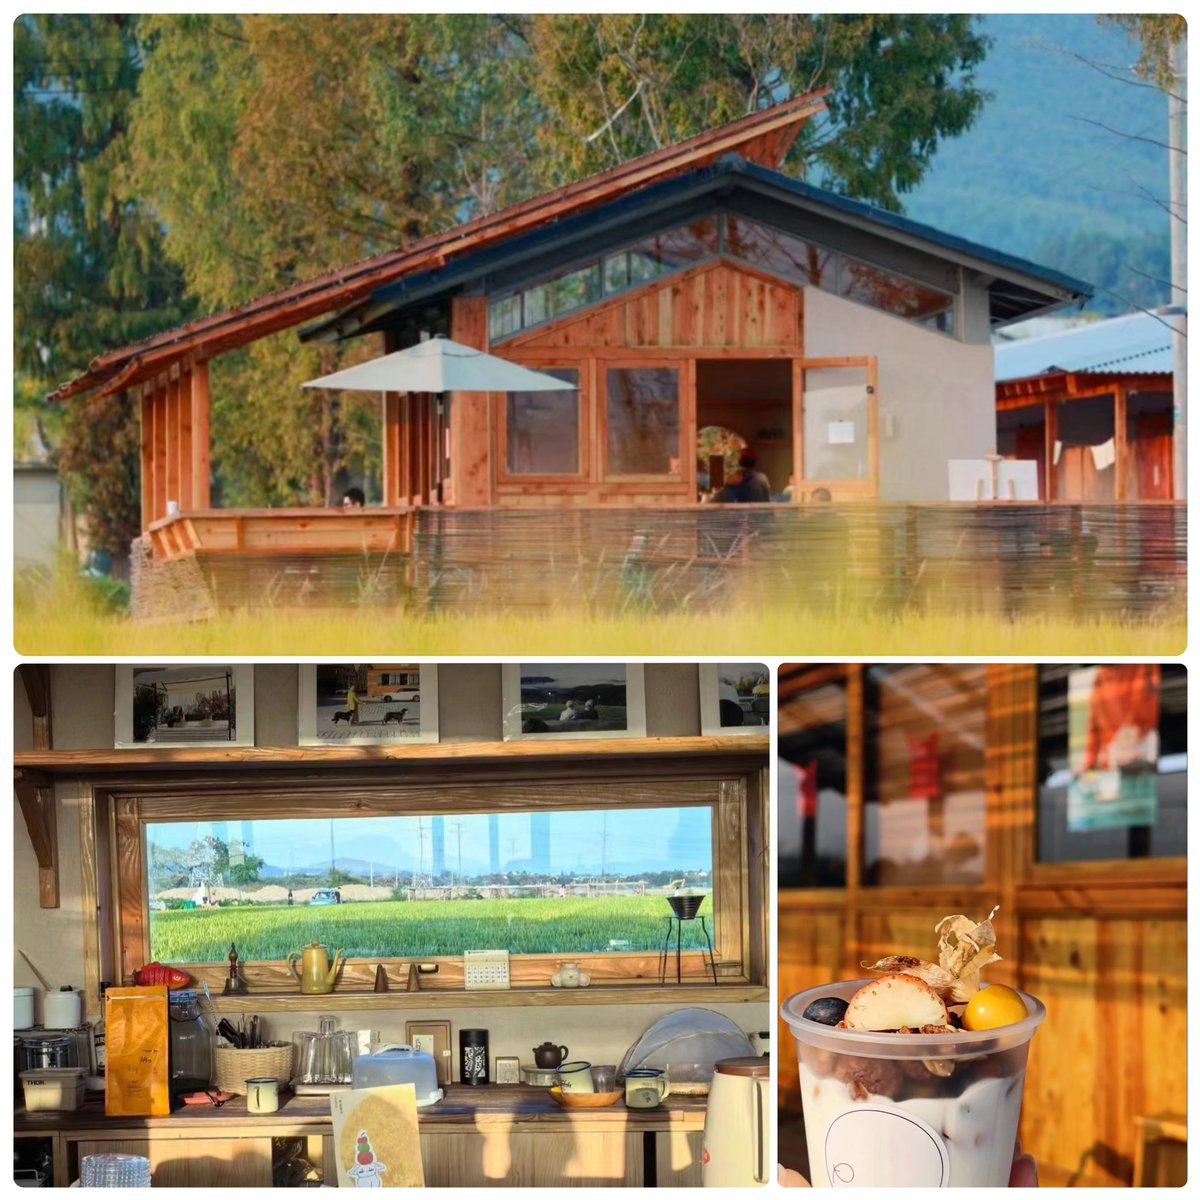 【I am waiting for you at the “Village Café☕️” in📍#Yuhang】Coffee and the countryside, which used to go to the difference way，now they blend seamlessly. A cup of coffee, a view🪟，and a day of leisure😎—this is an exile back to the soul🥂.#EscapeTheCity #PeacefulMoments